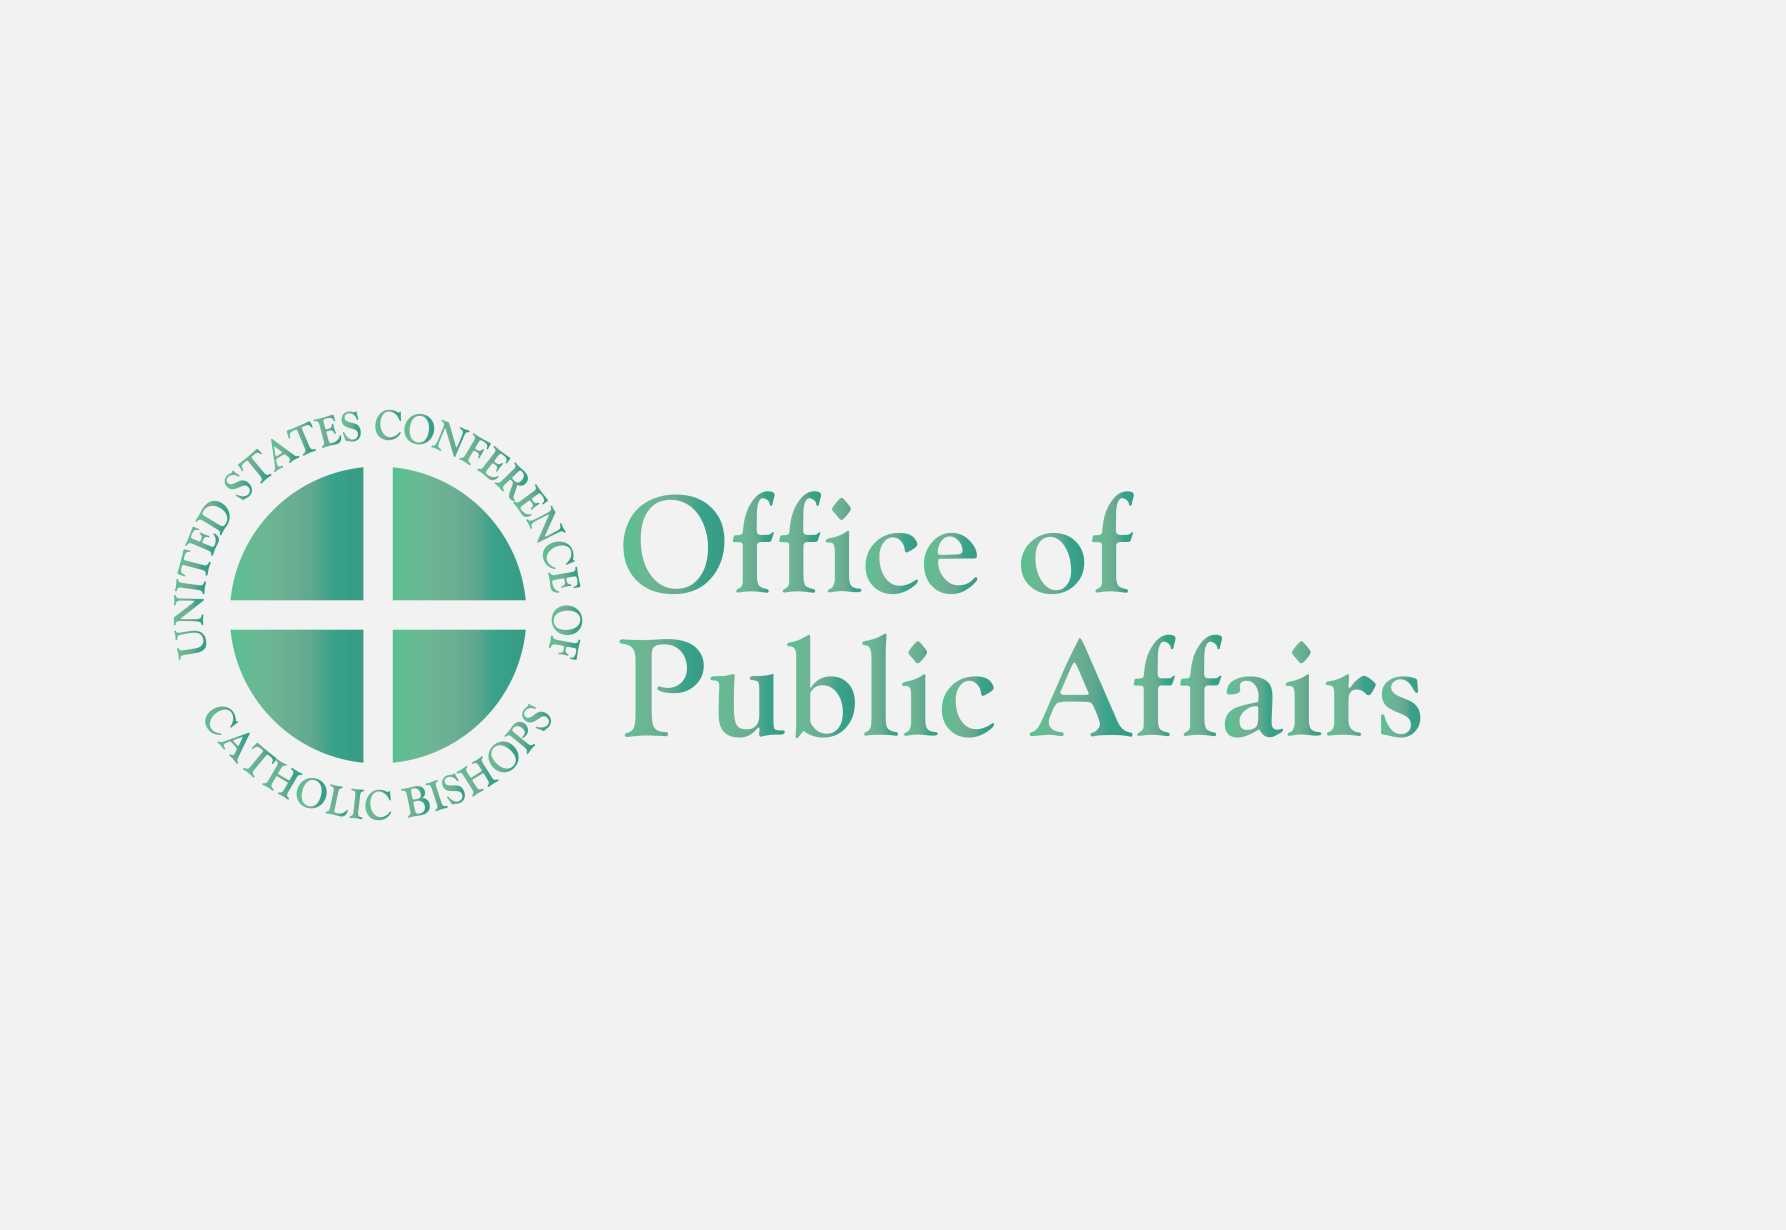 MEDIA ADVISORY: Nationwide Invitation to Prayer for the End of Abortion and for the Protection of Women and Pre-Born Children